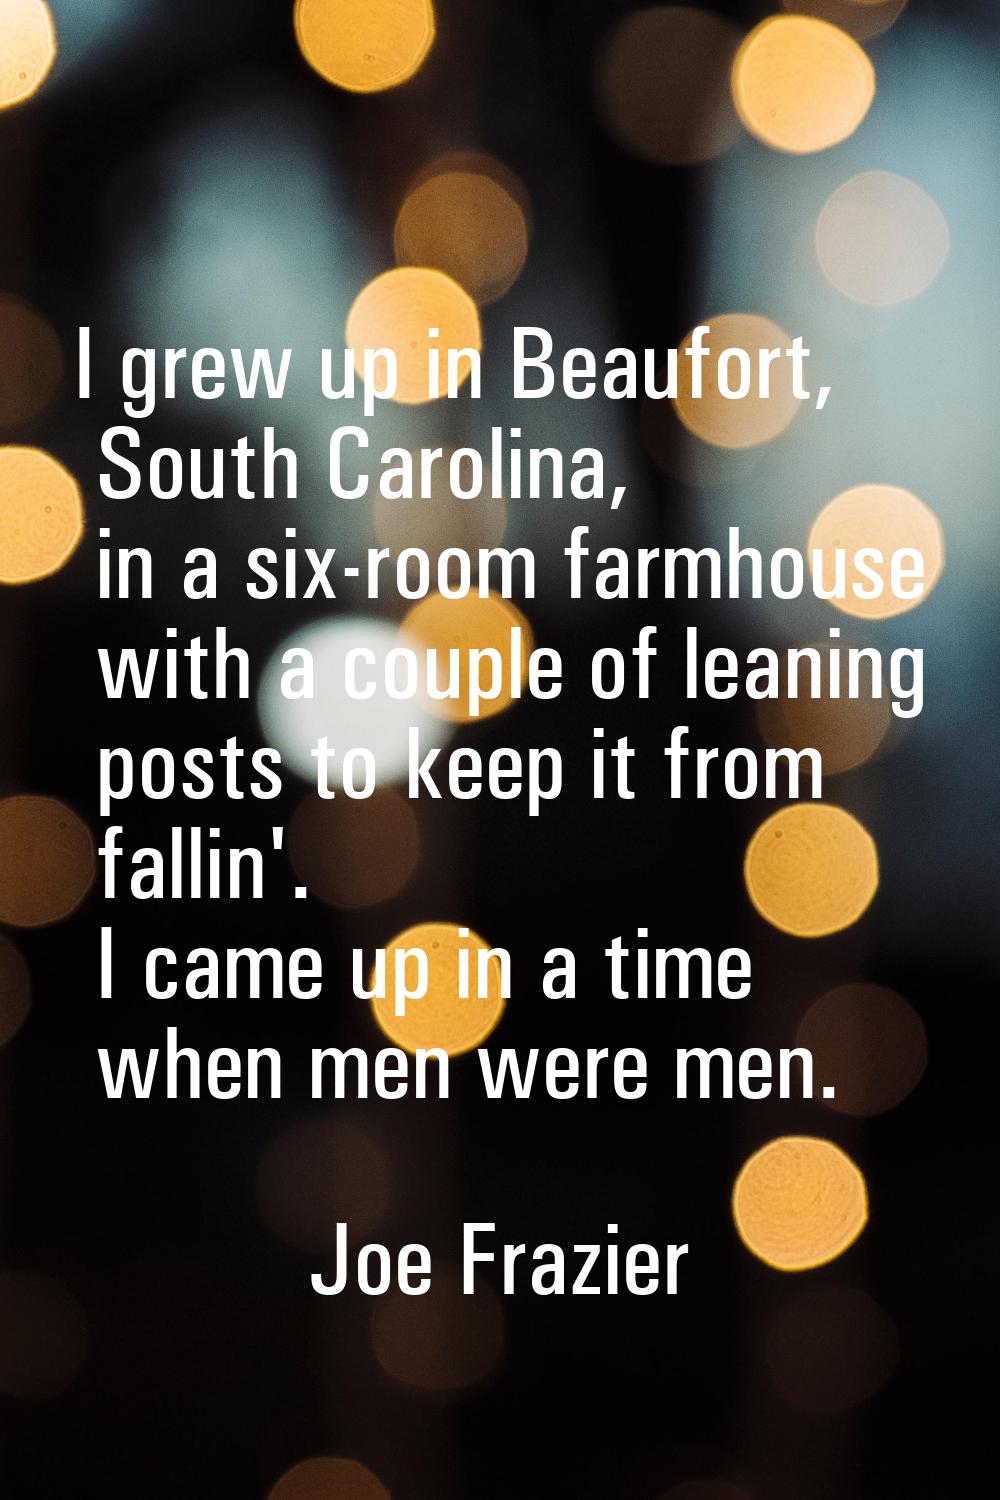 I grew up in Beaufort, South Carolina, in a six-room farmhouse with a couple of leaning posts to ke